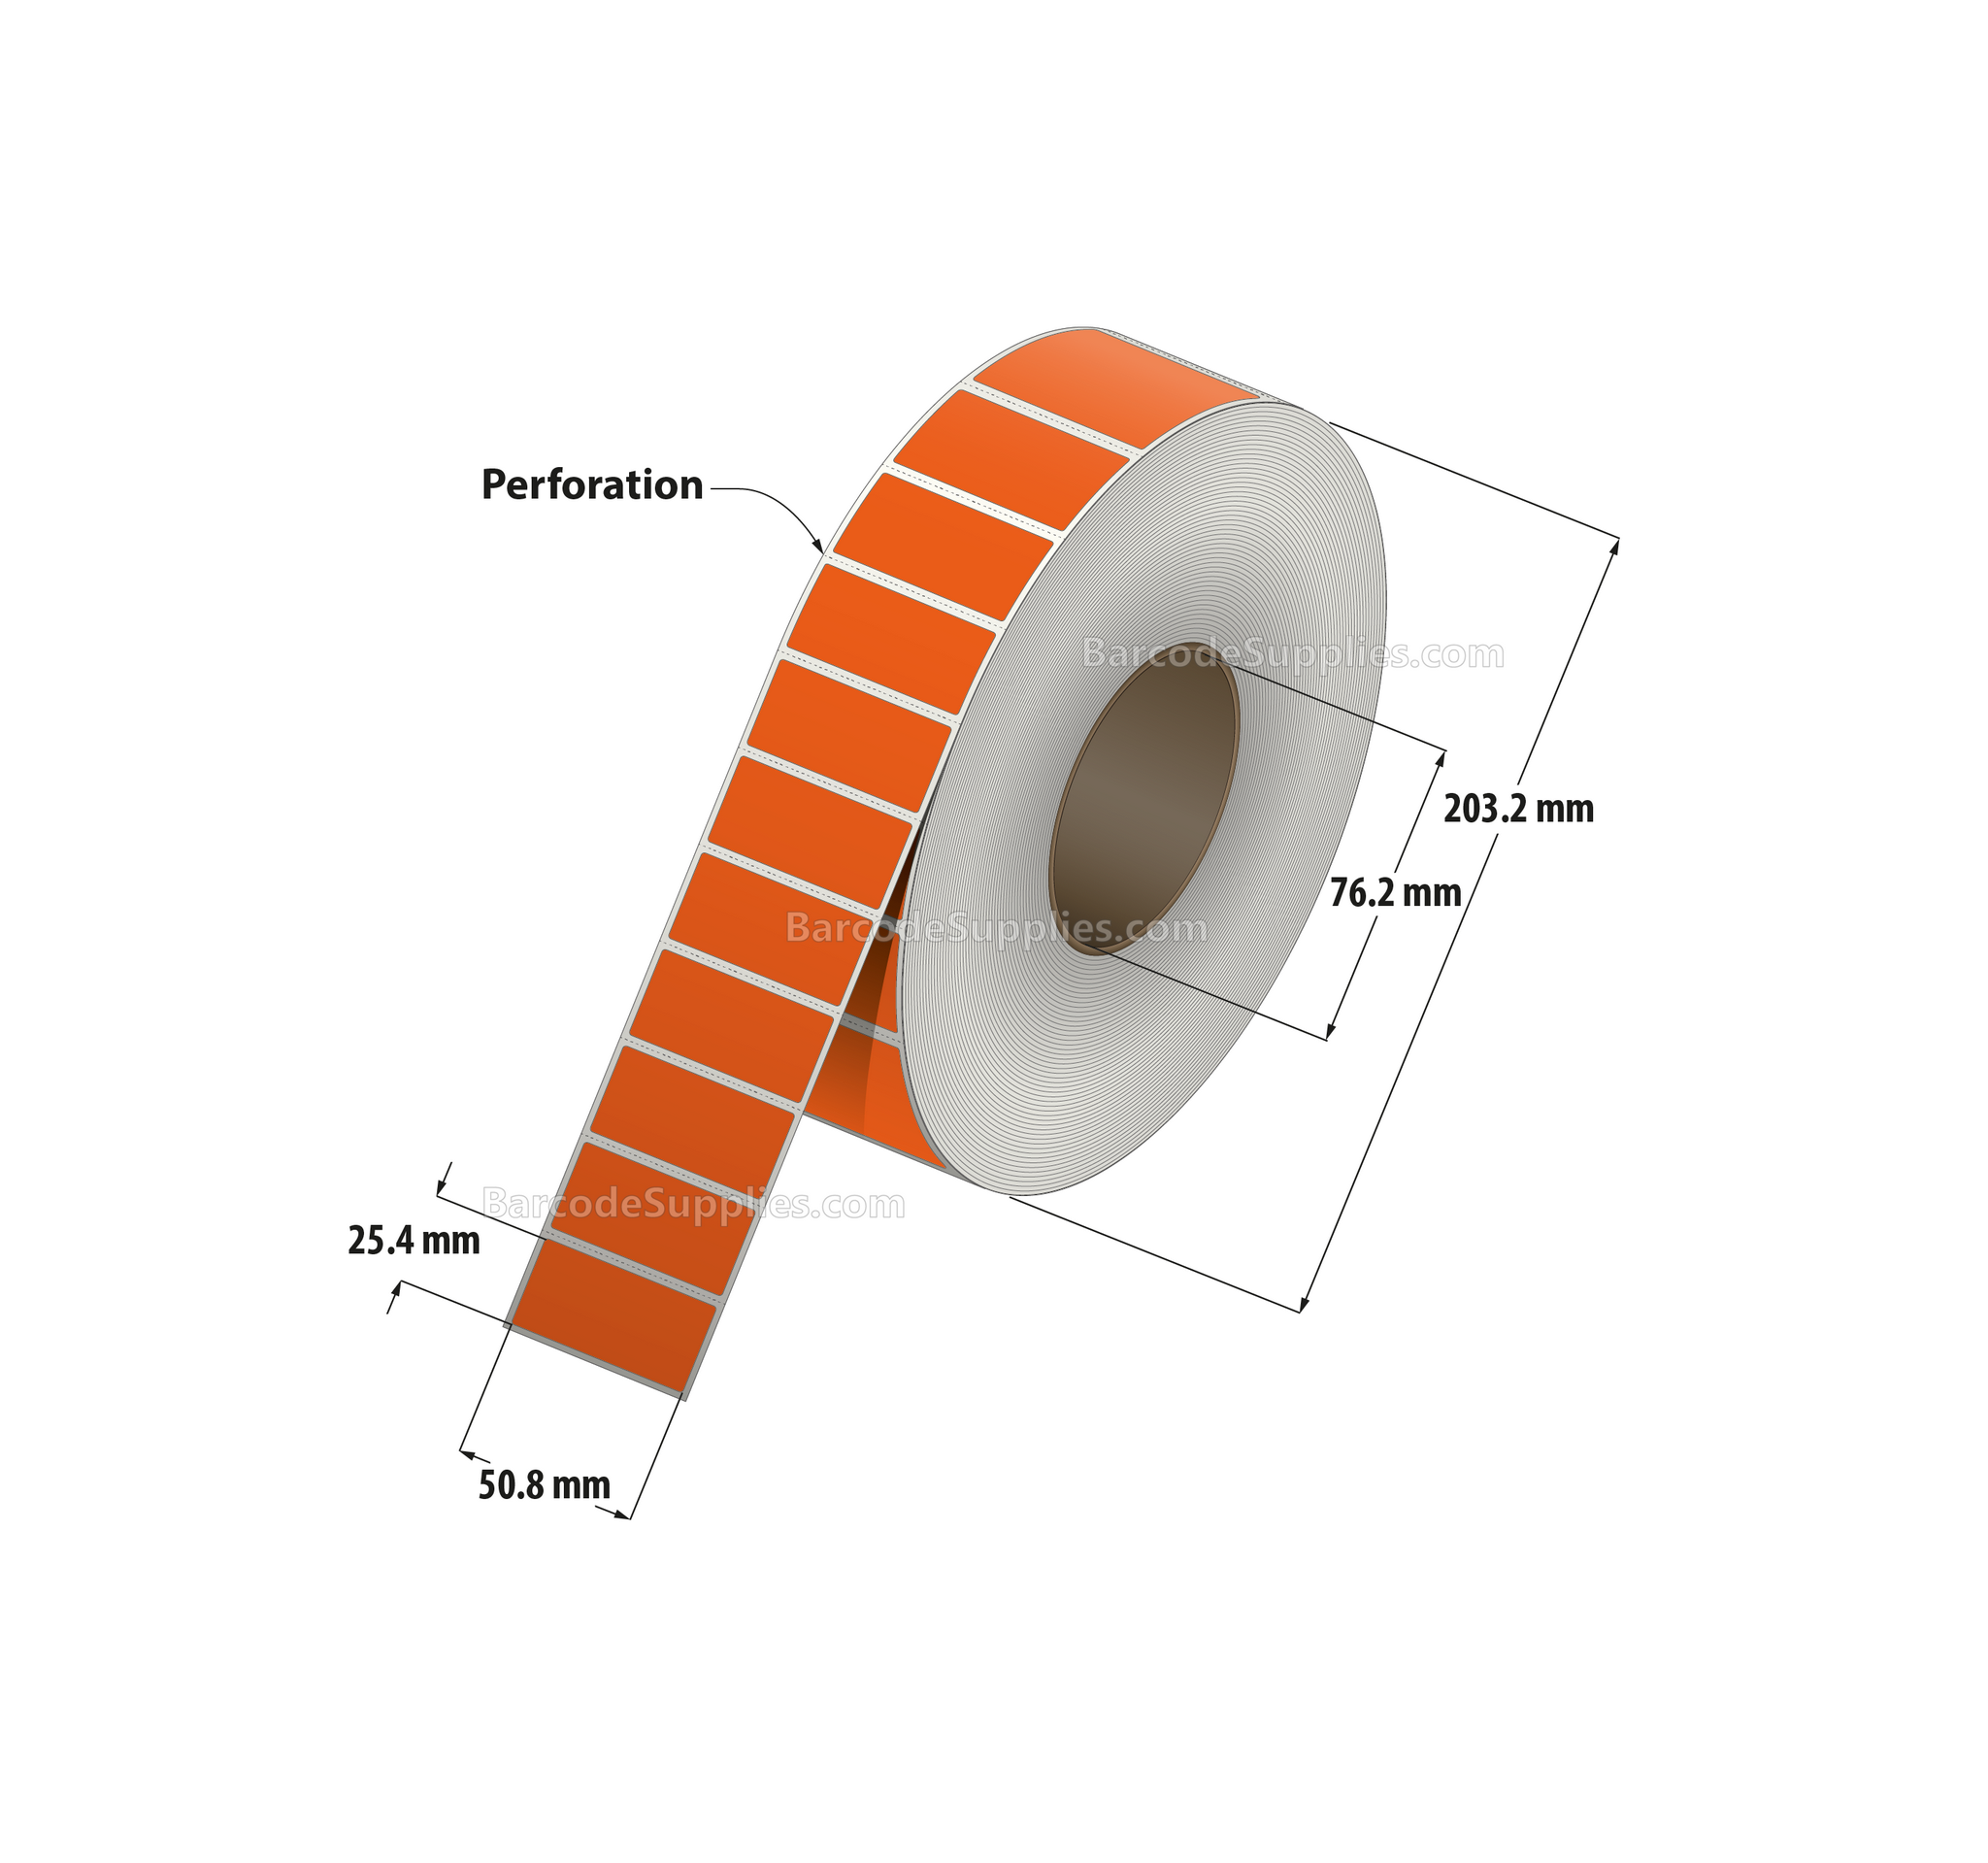 2 x 1 Thermal Transfer 1495 Orange Labels With Permanent Adhesive - Perforated - 5500 Labels Per Roll - Carton Of 8 Rolls - 44000 Labels Total - MPN: RFC-2-1-5500-OR